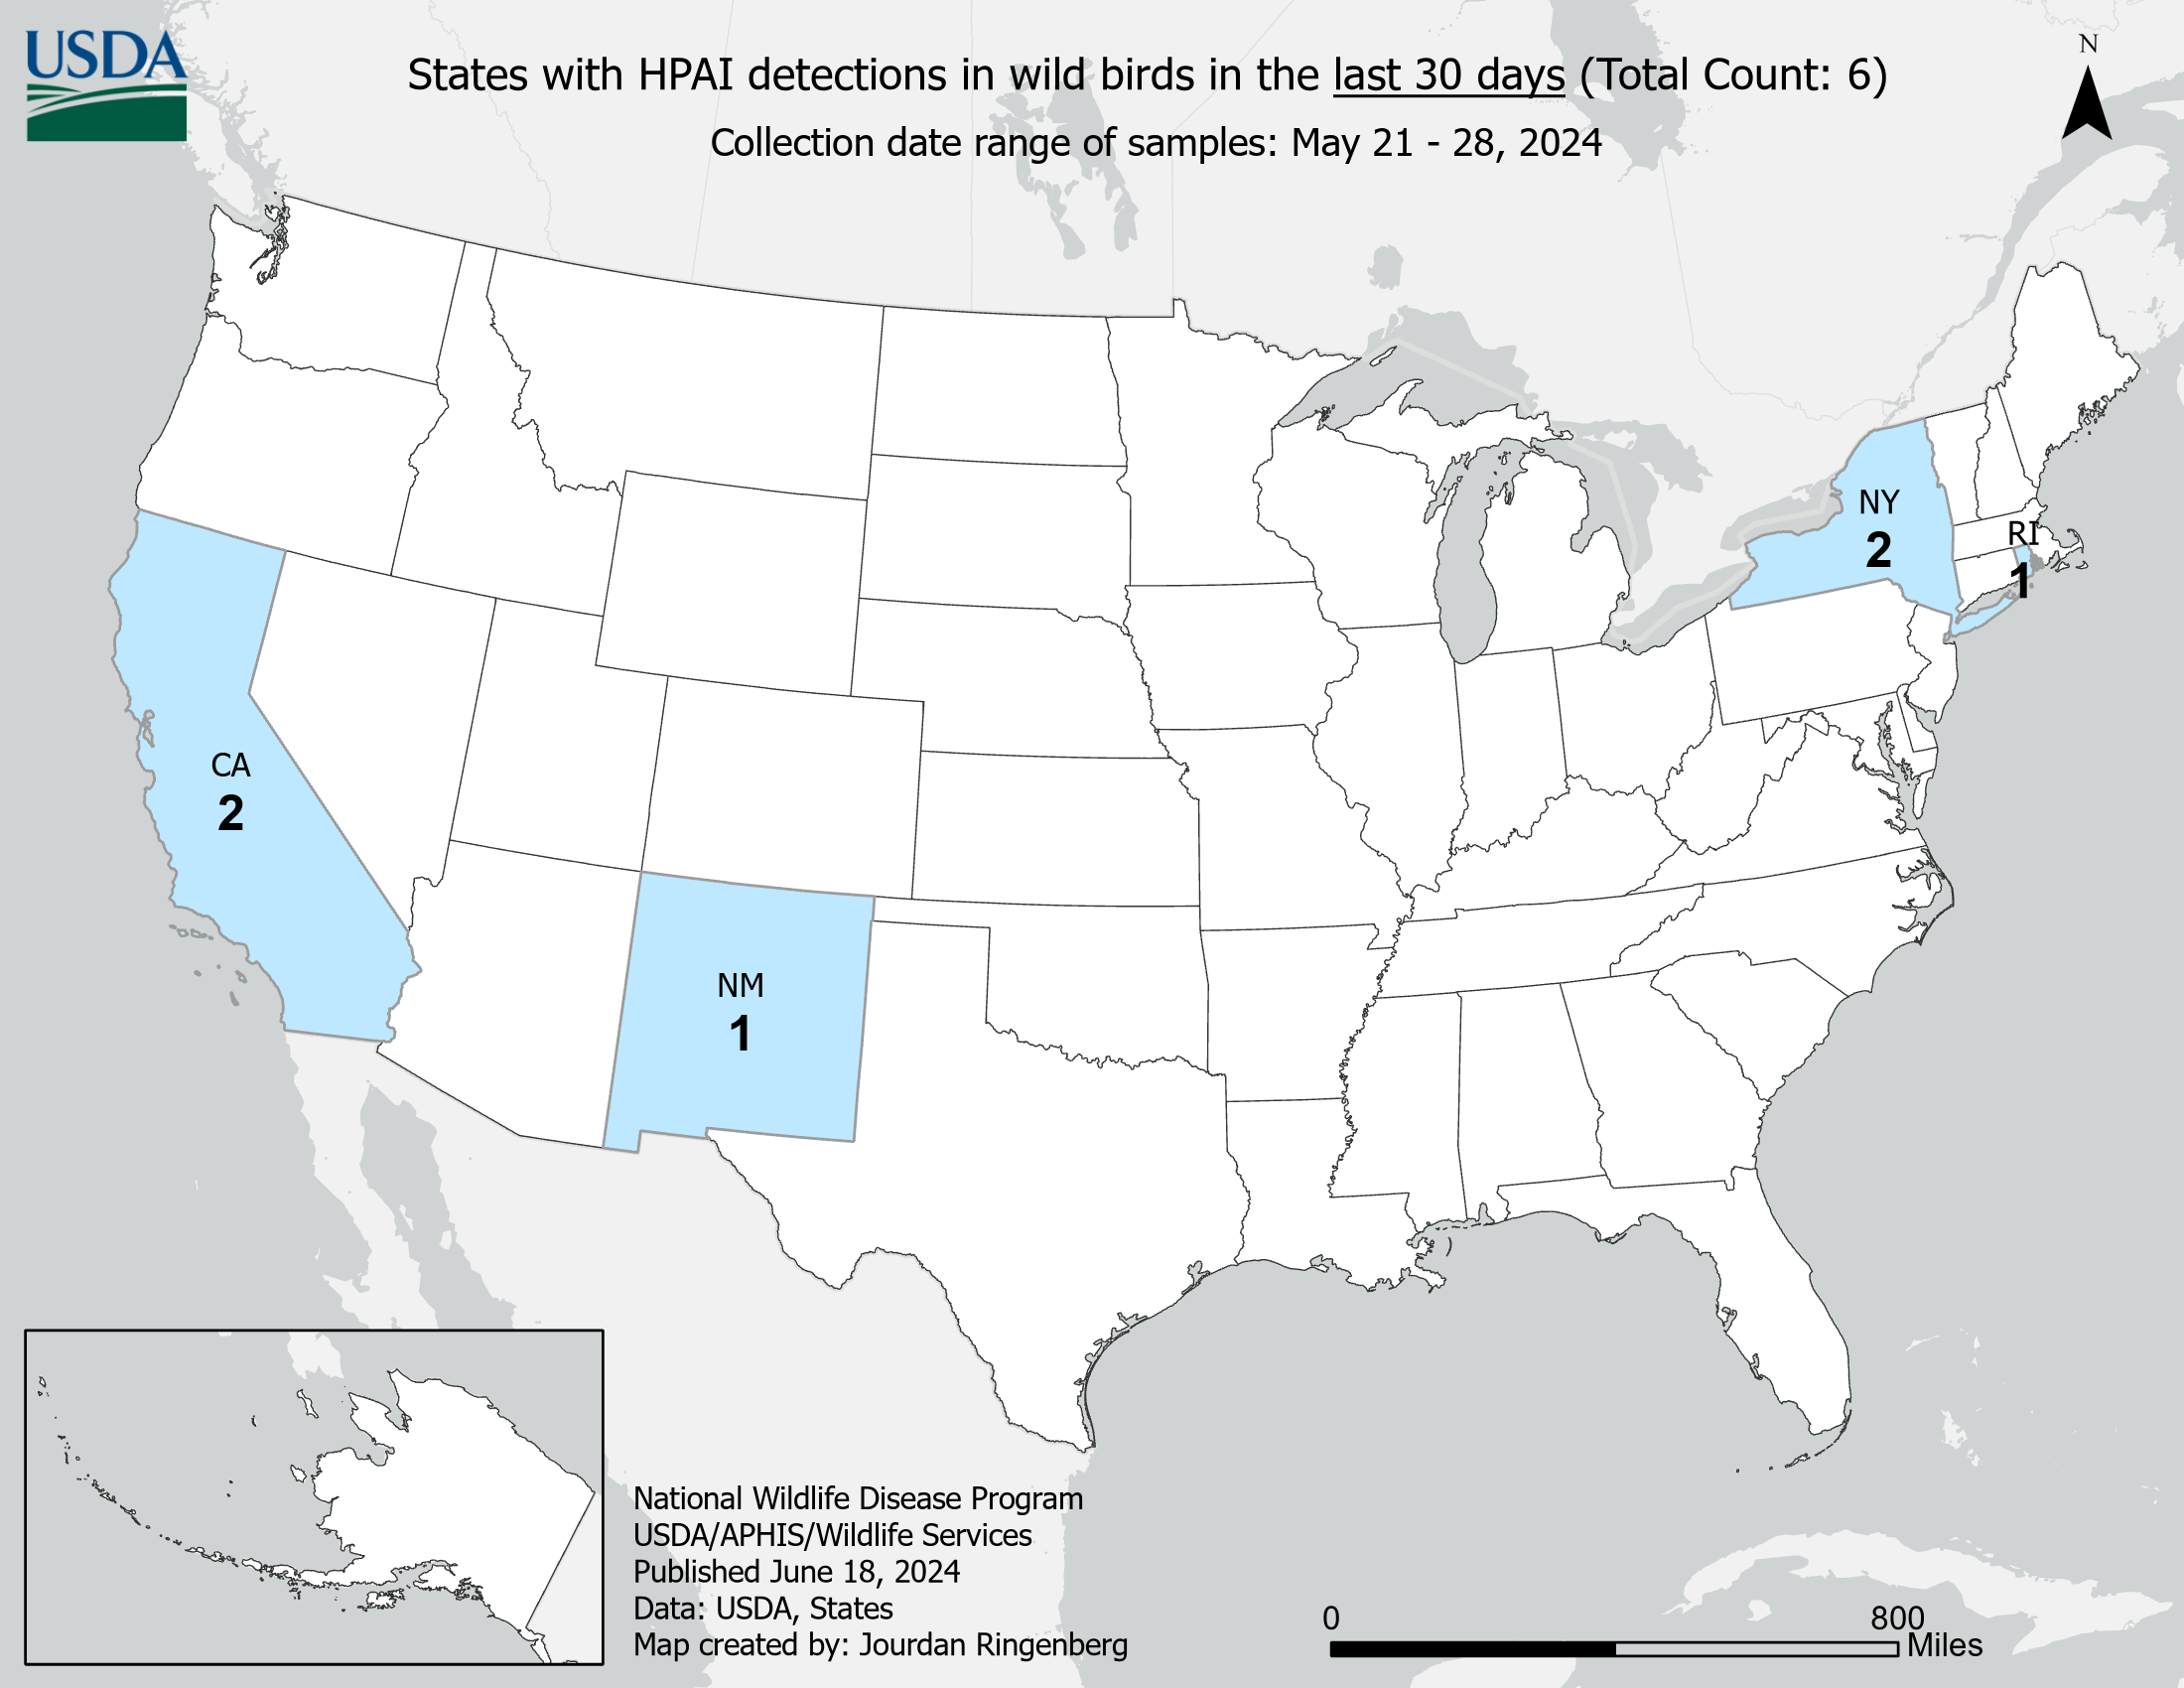 map showing States with HPAI detections in wild birds in the last 30 days